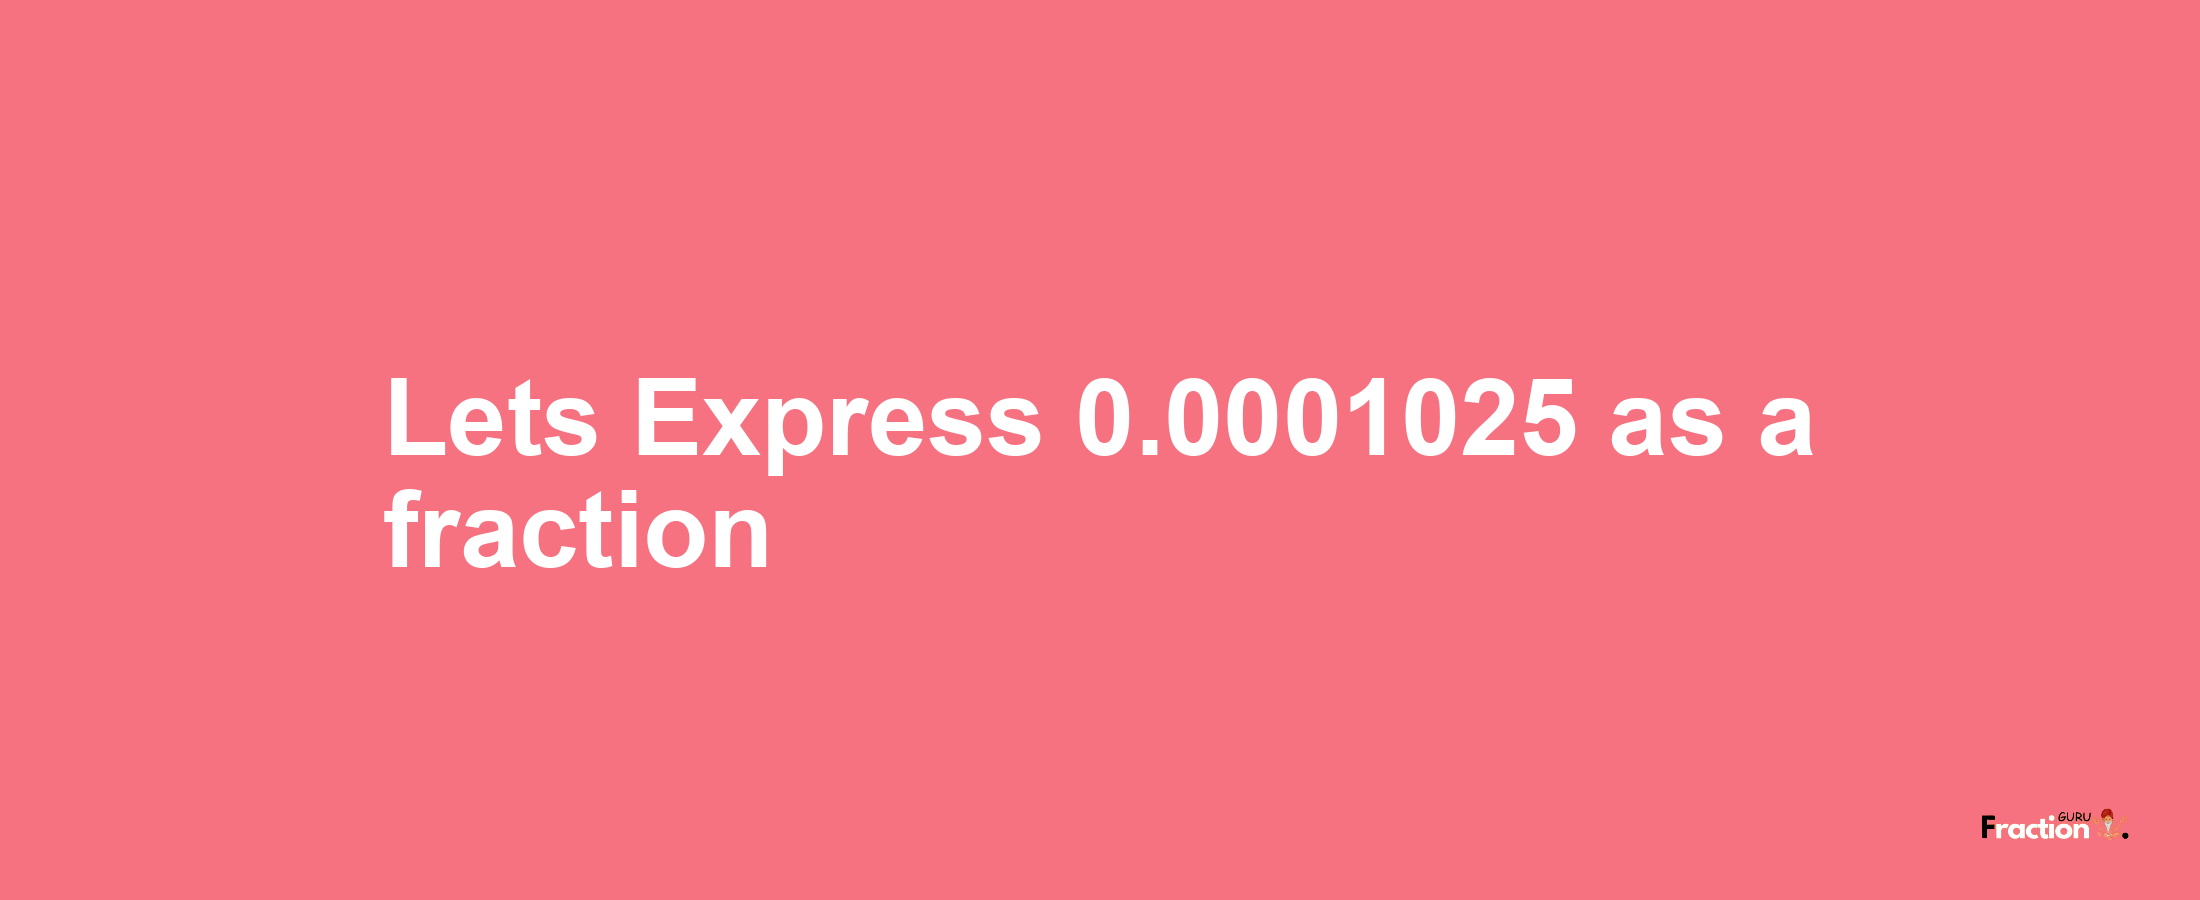 Lets Express 0.0001025 as afraction